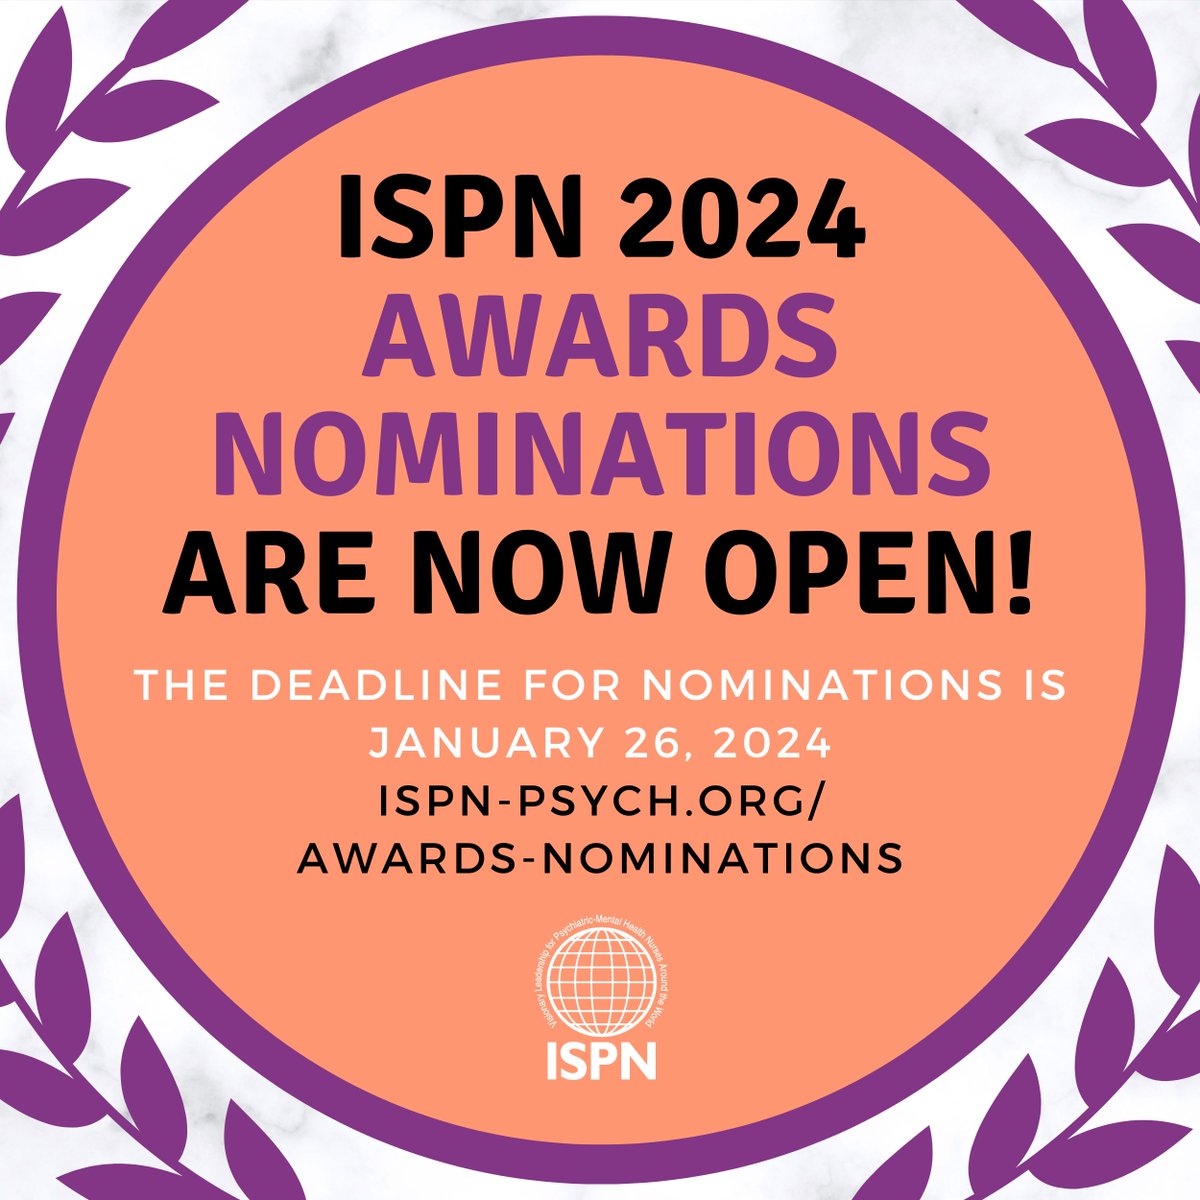 Nominations for ISPN's eight awards categories are due by January 26. Winners will be recognized at the ISPN 2024 Annual Conference, April 3-6, 2024 in Providence, RI. To see awards categories and to submit a nominee, visit here... ispn-psych.org/2024-annual-co… #ispnconnect